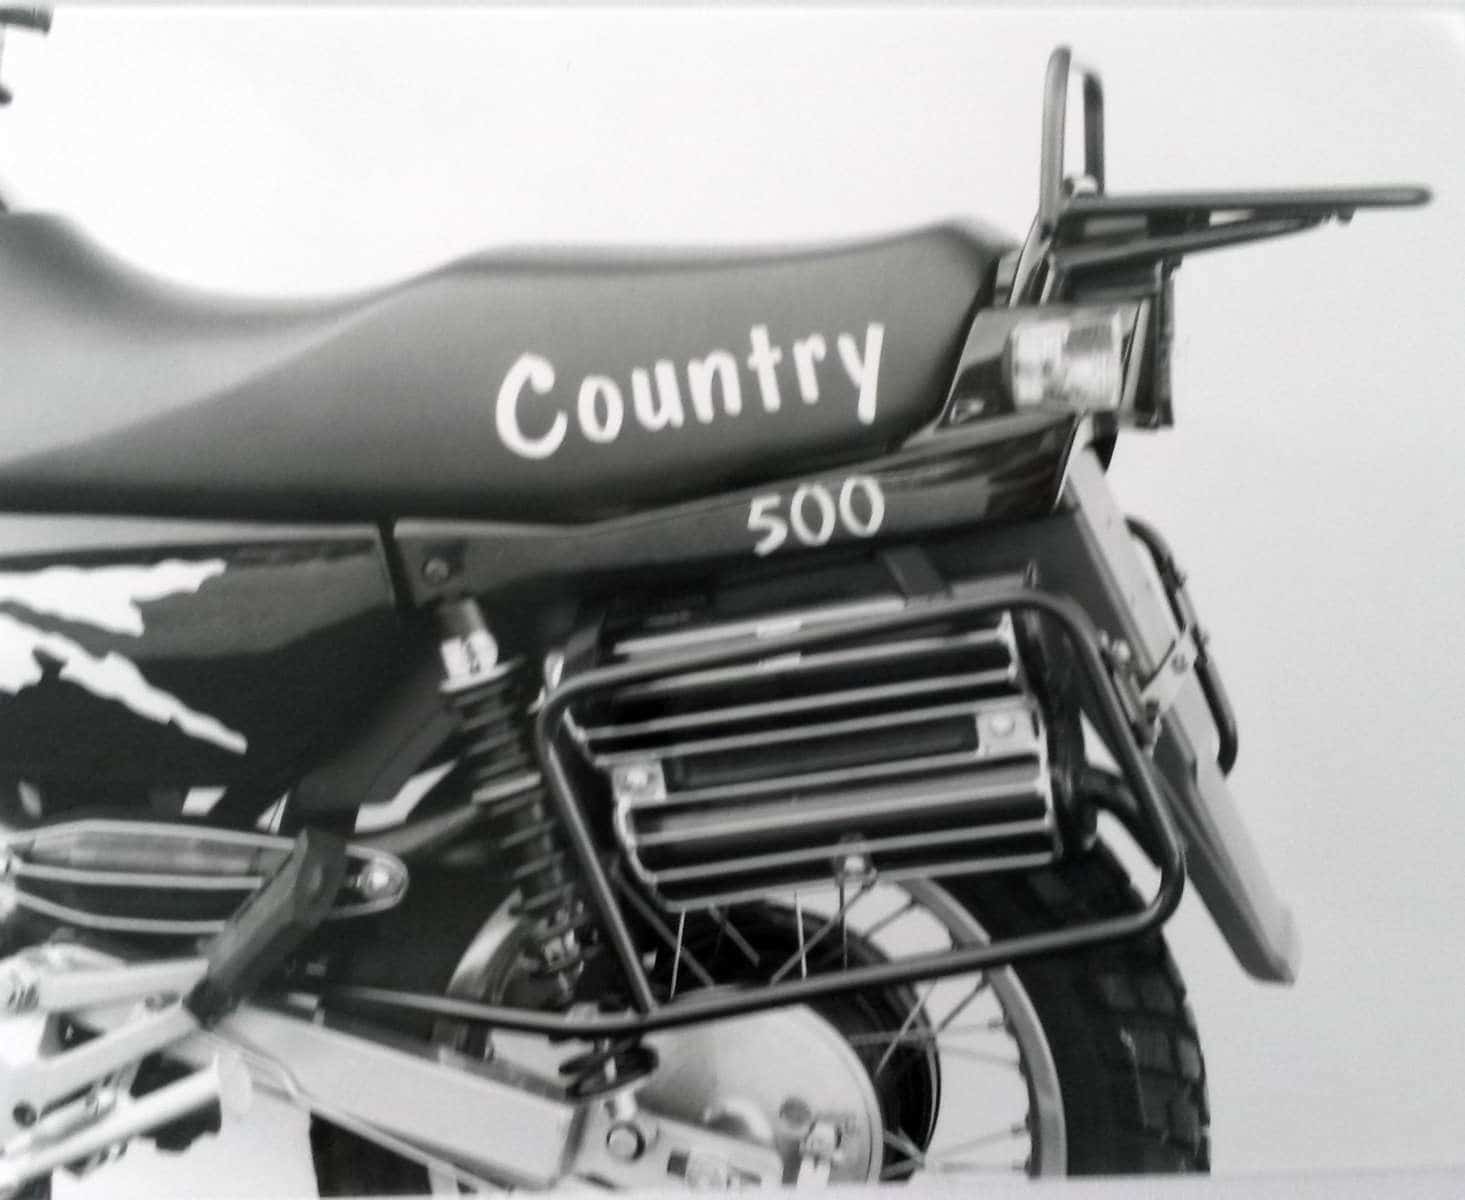 Sidecarrier permanent mounted black for MZ Country (1993-1998)